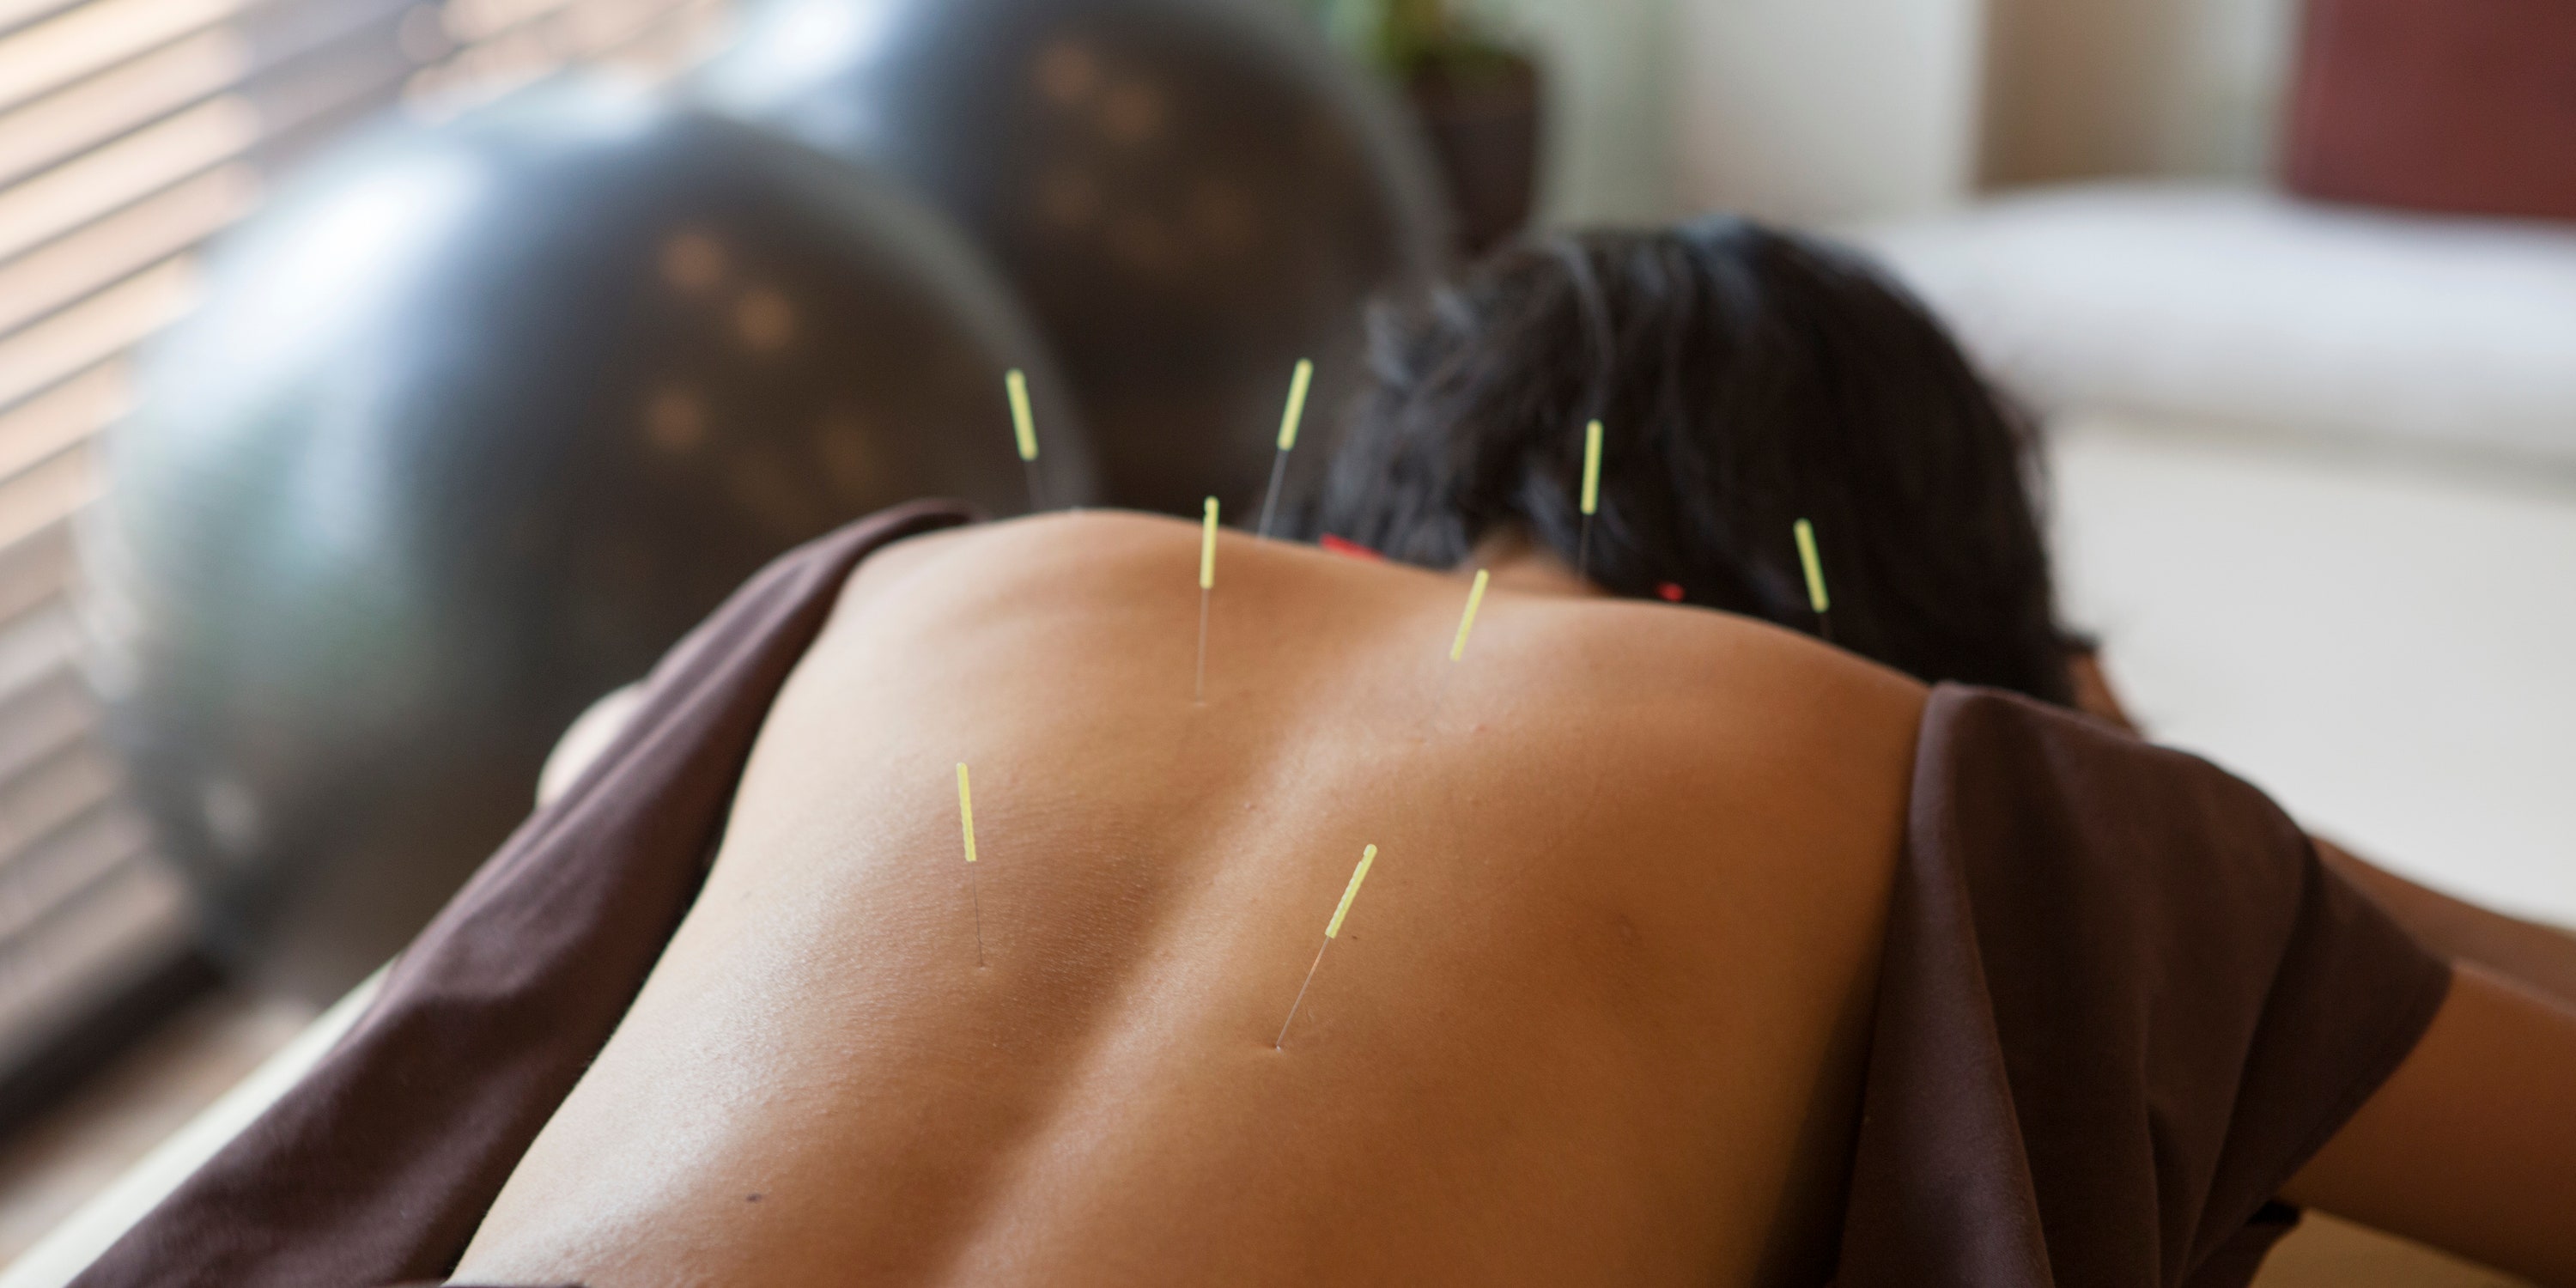 Acupuncture Terms to Know Before Your First Appointment